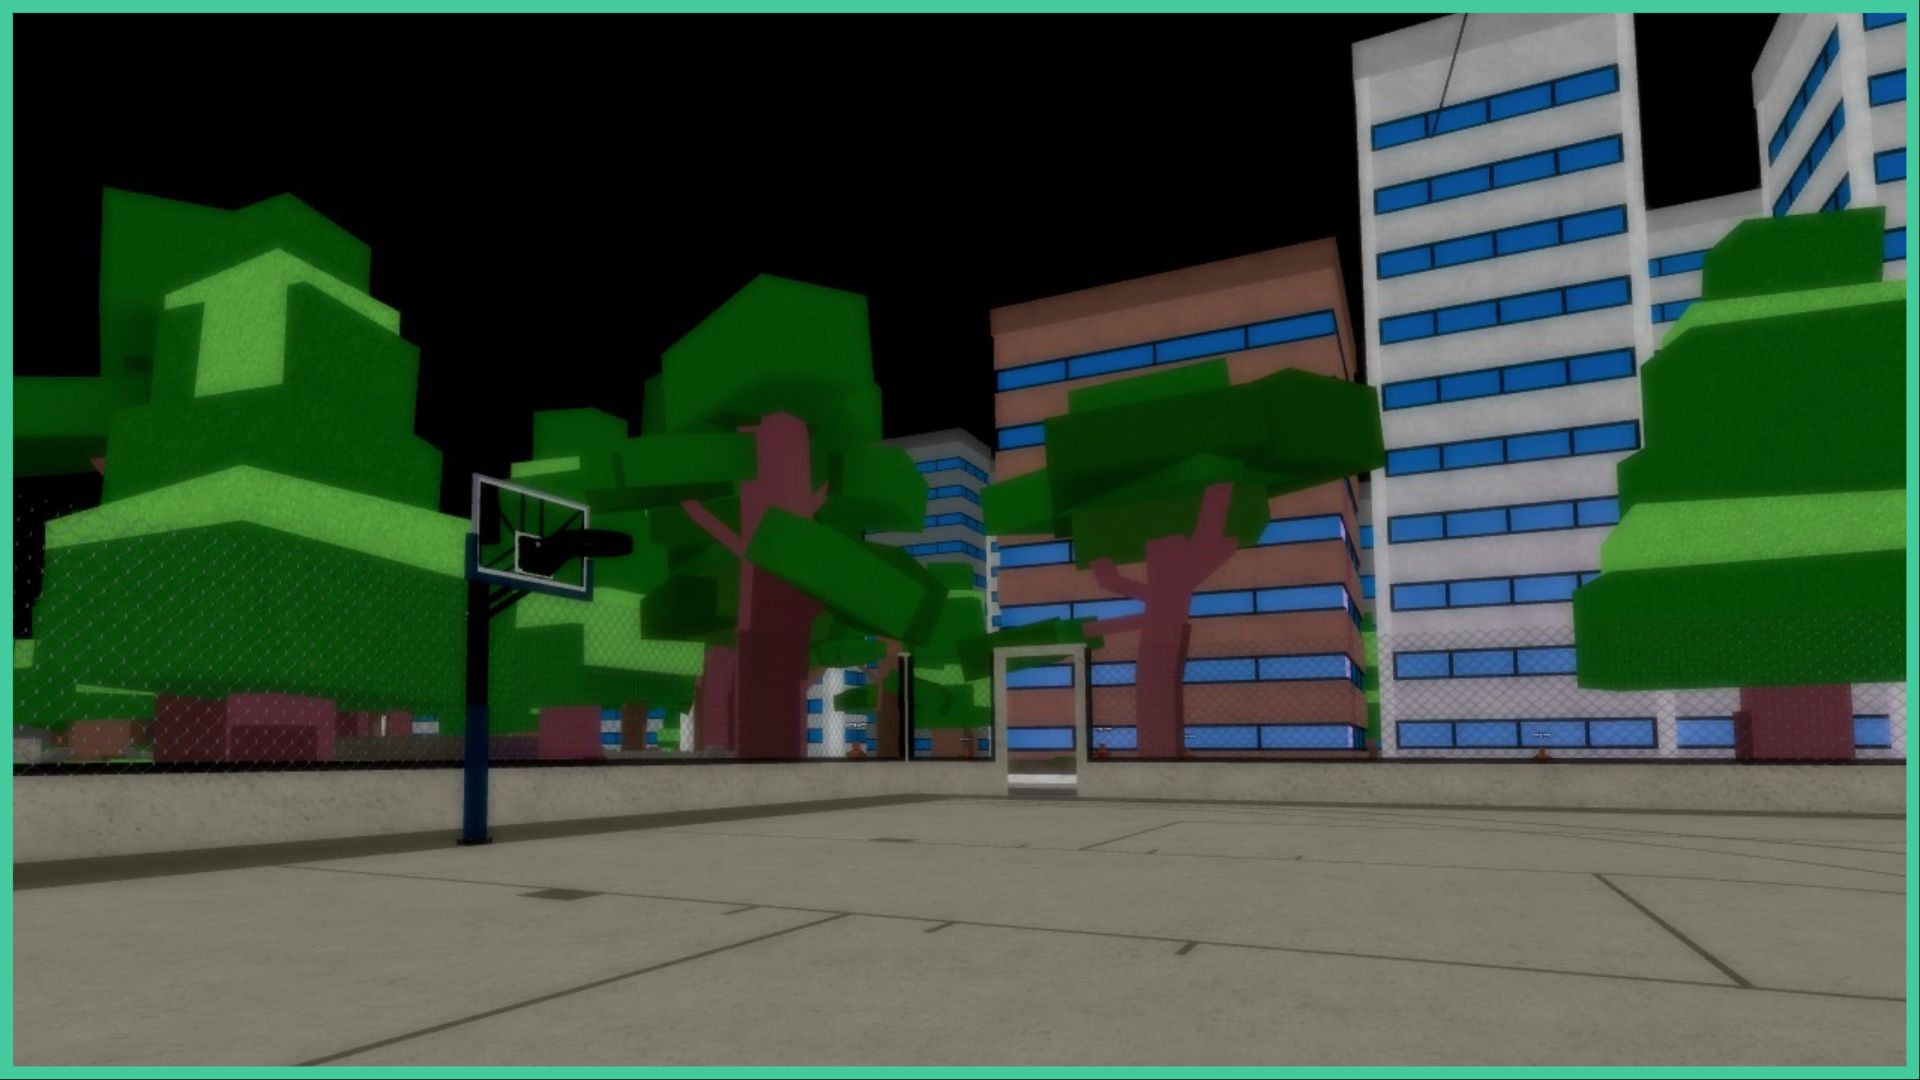 feature image for our project xl race tier list, the image features a screenshot from the game of a basketball court in the middle of a city, with tall office buildings and trees